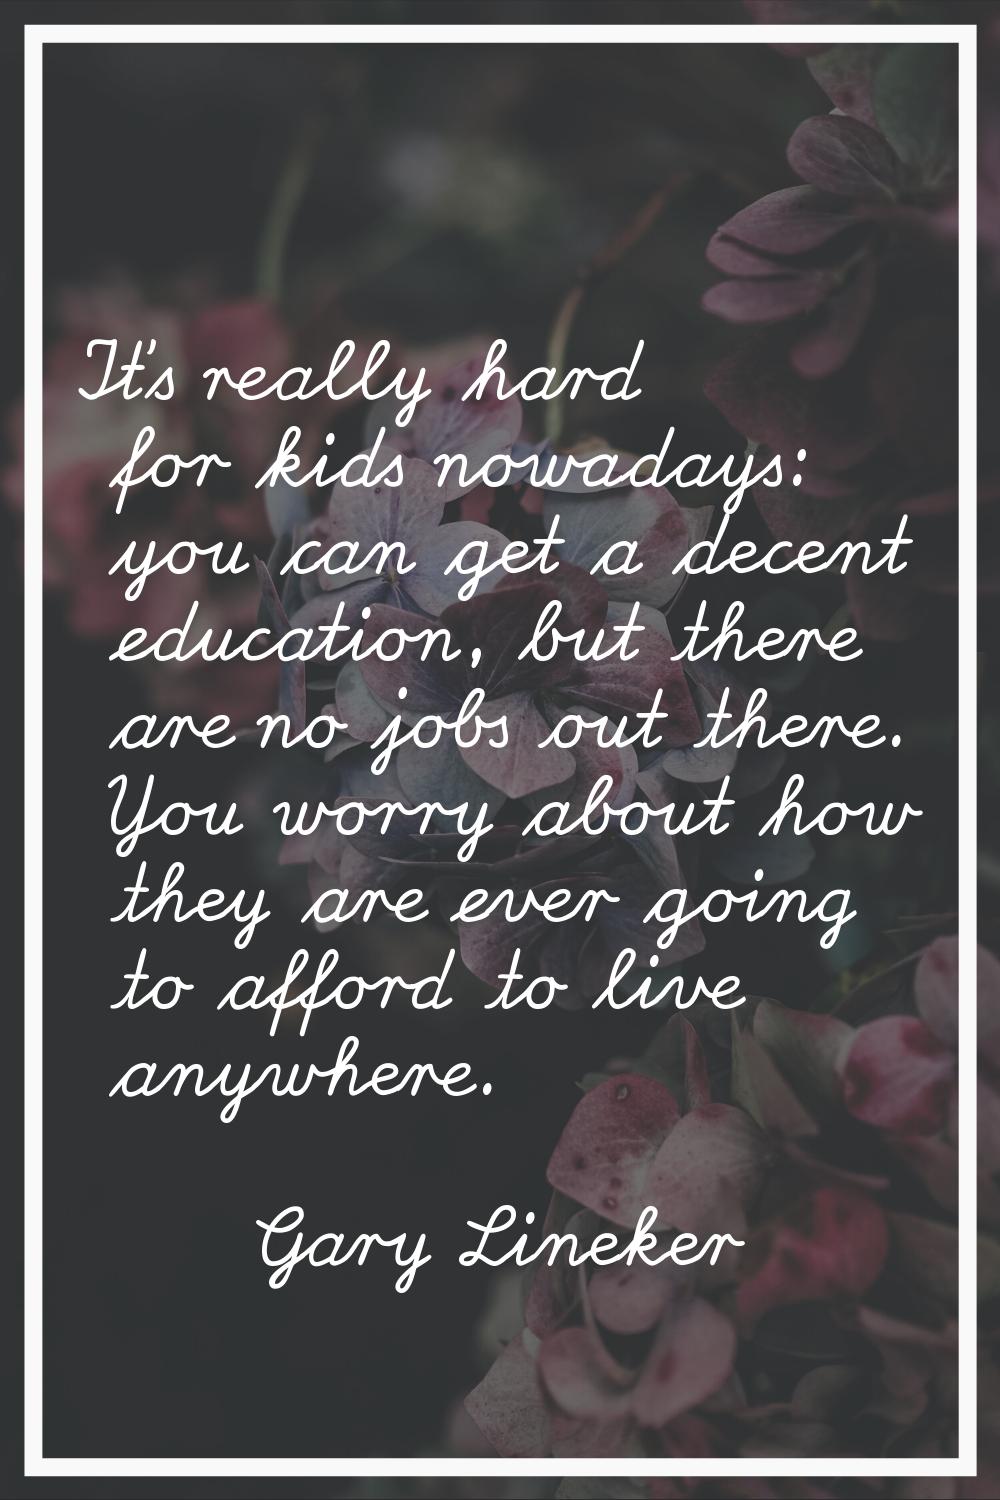 It's really hard for kids nowadays: you can get a decent education, but there are no jobs out there